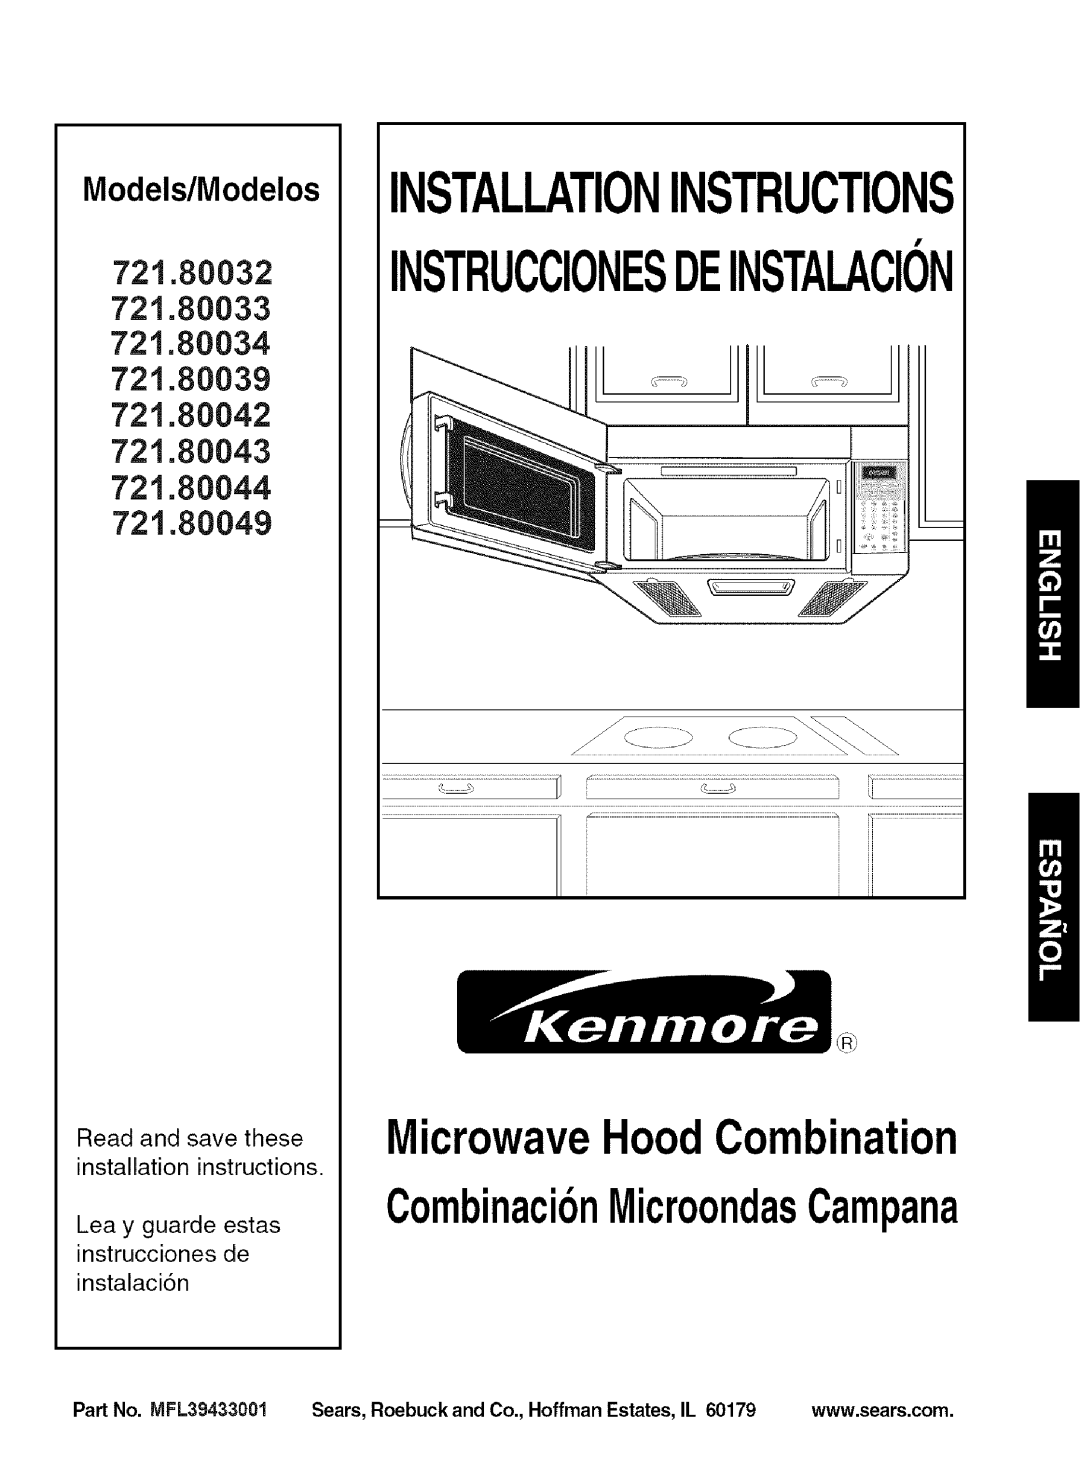 Kenmore 721.80042 installation instructions Read and save these installation instructions, Part No. MFL39433001, 721.80032 